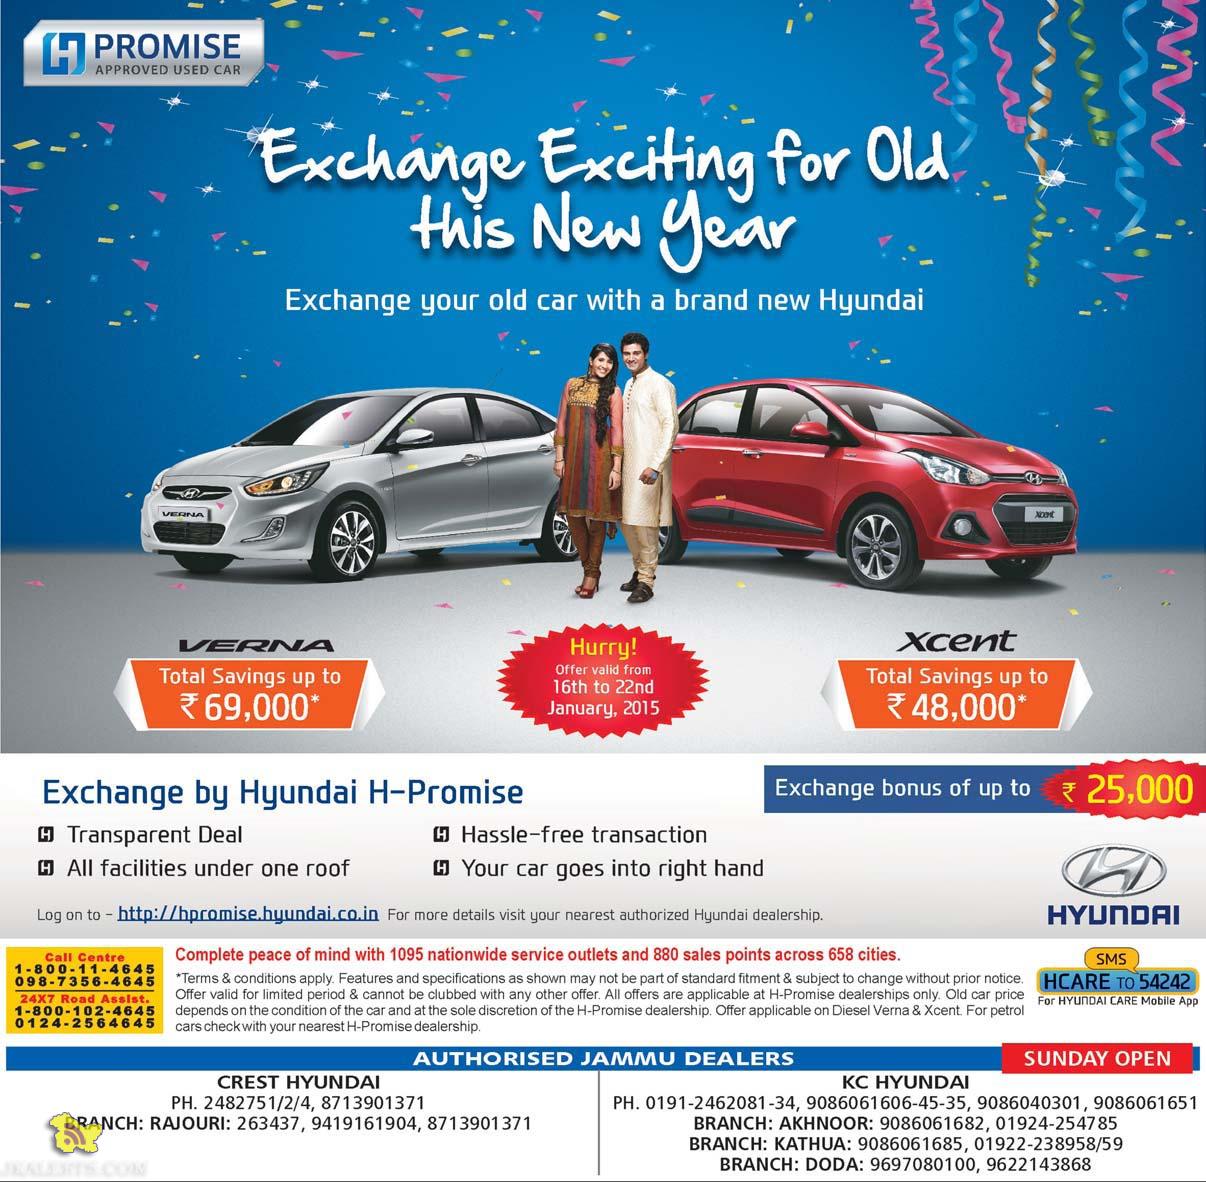 Hyundai Exchange offer, exchange your old car with a brand new Hyundai